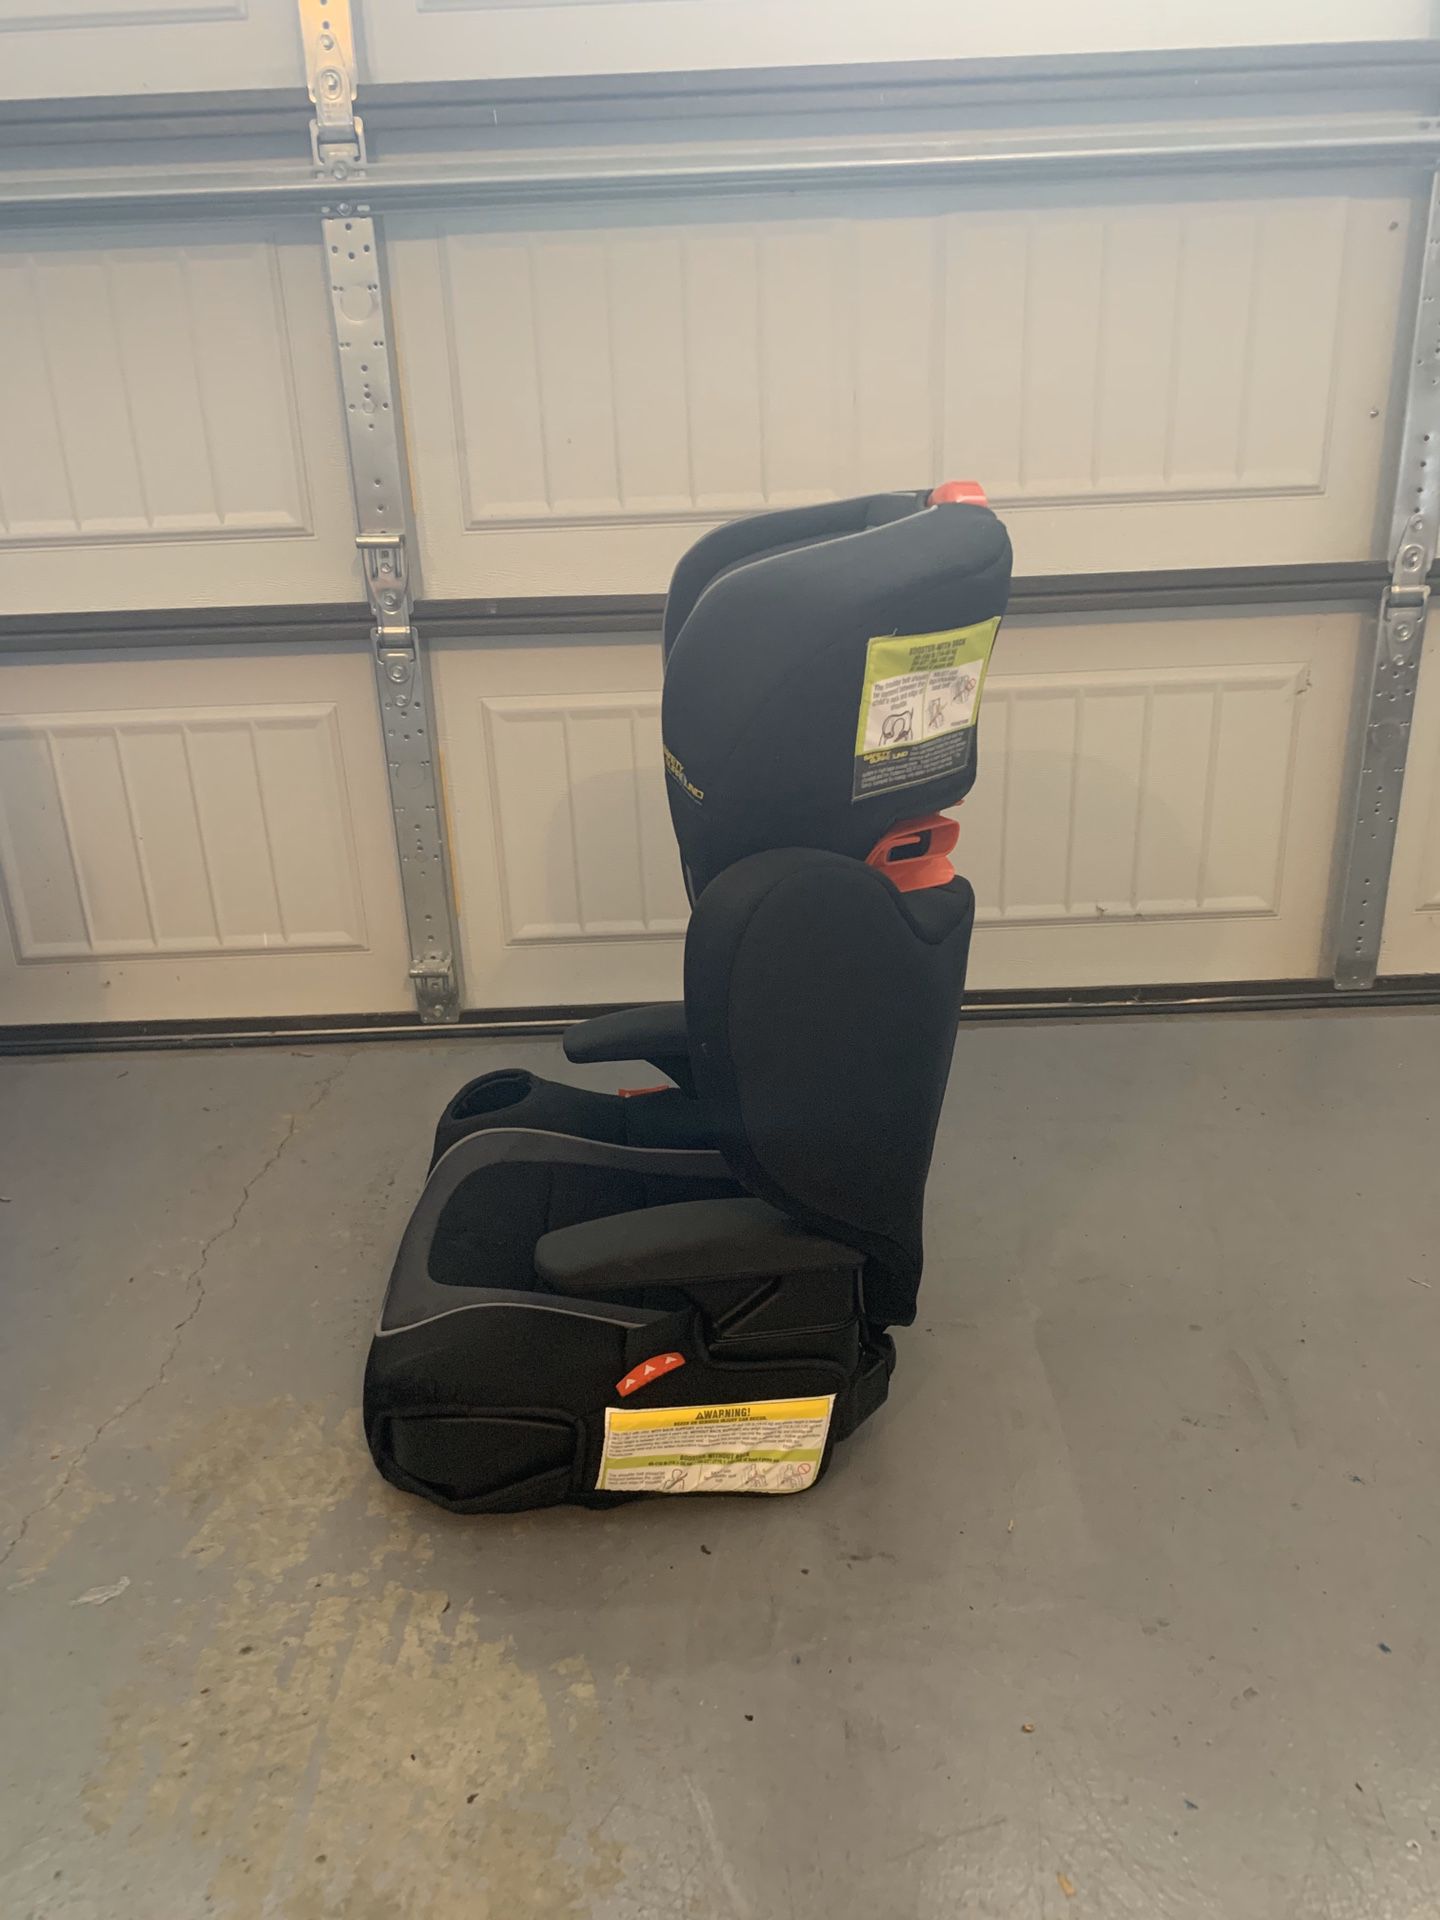 Booster seat two in one